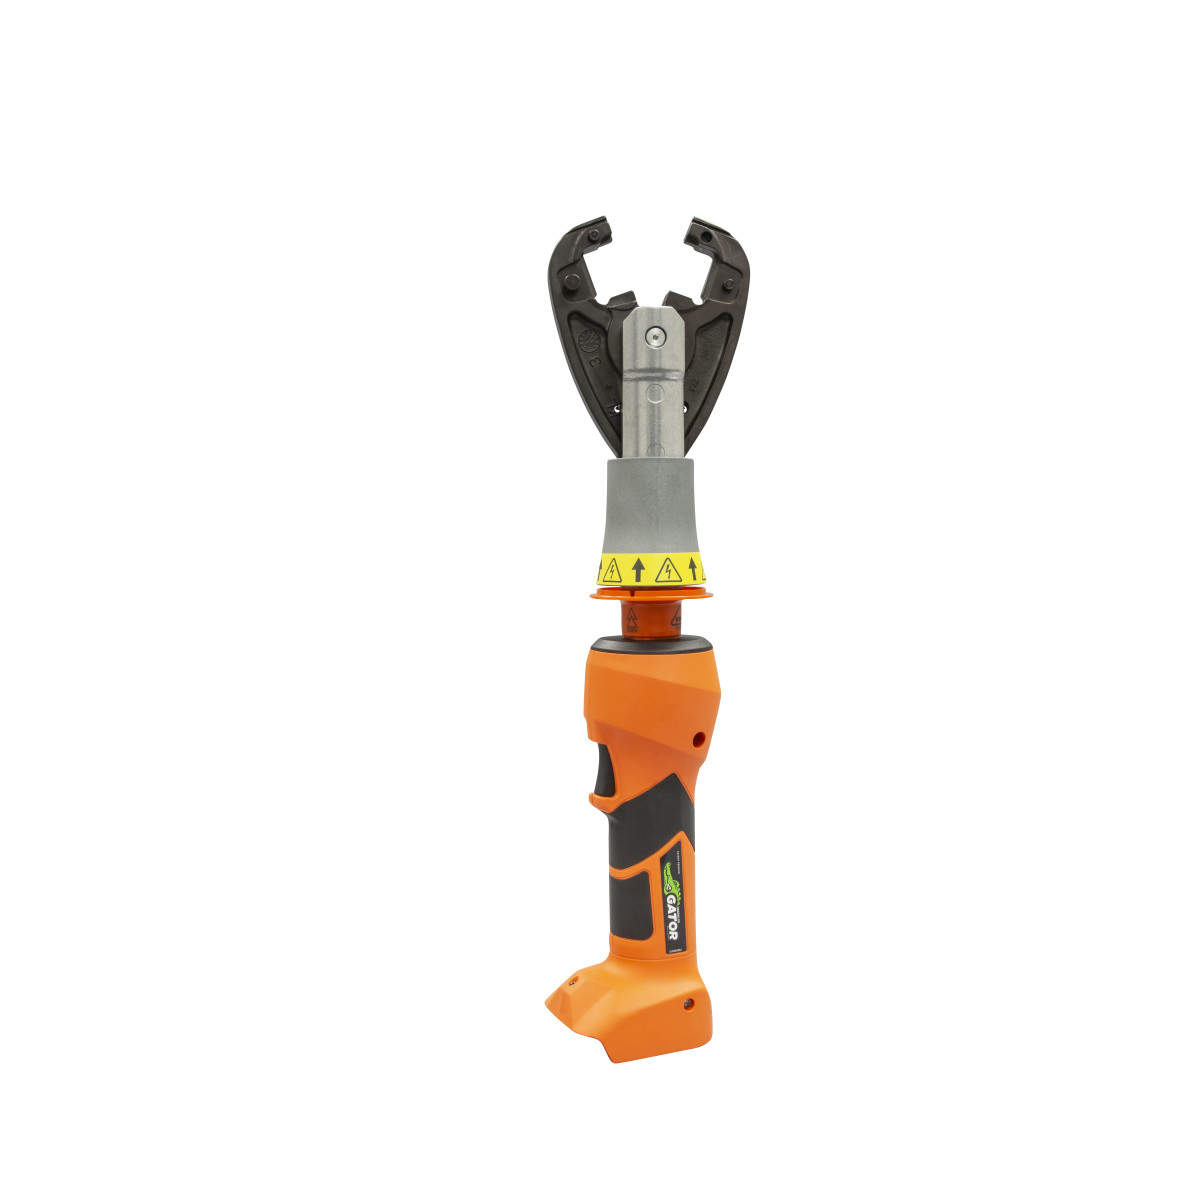 6 Ton Insulated Crimper with CJK Head. 1000v Insulation. Brush guarded head - helps avoid accidental contact with conductors. Tri-insulation barrier - Provides three (3) layers of protection (Patent Pending). 360° Rotating head  - For improved agility in confined work spaces. Double -tap safety feature option -Prevents unintentional operation. Bluetooth® communication